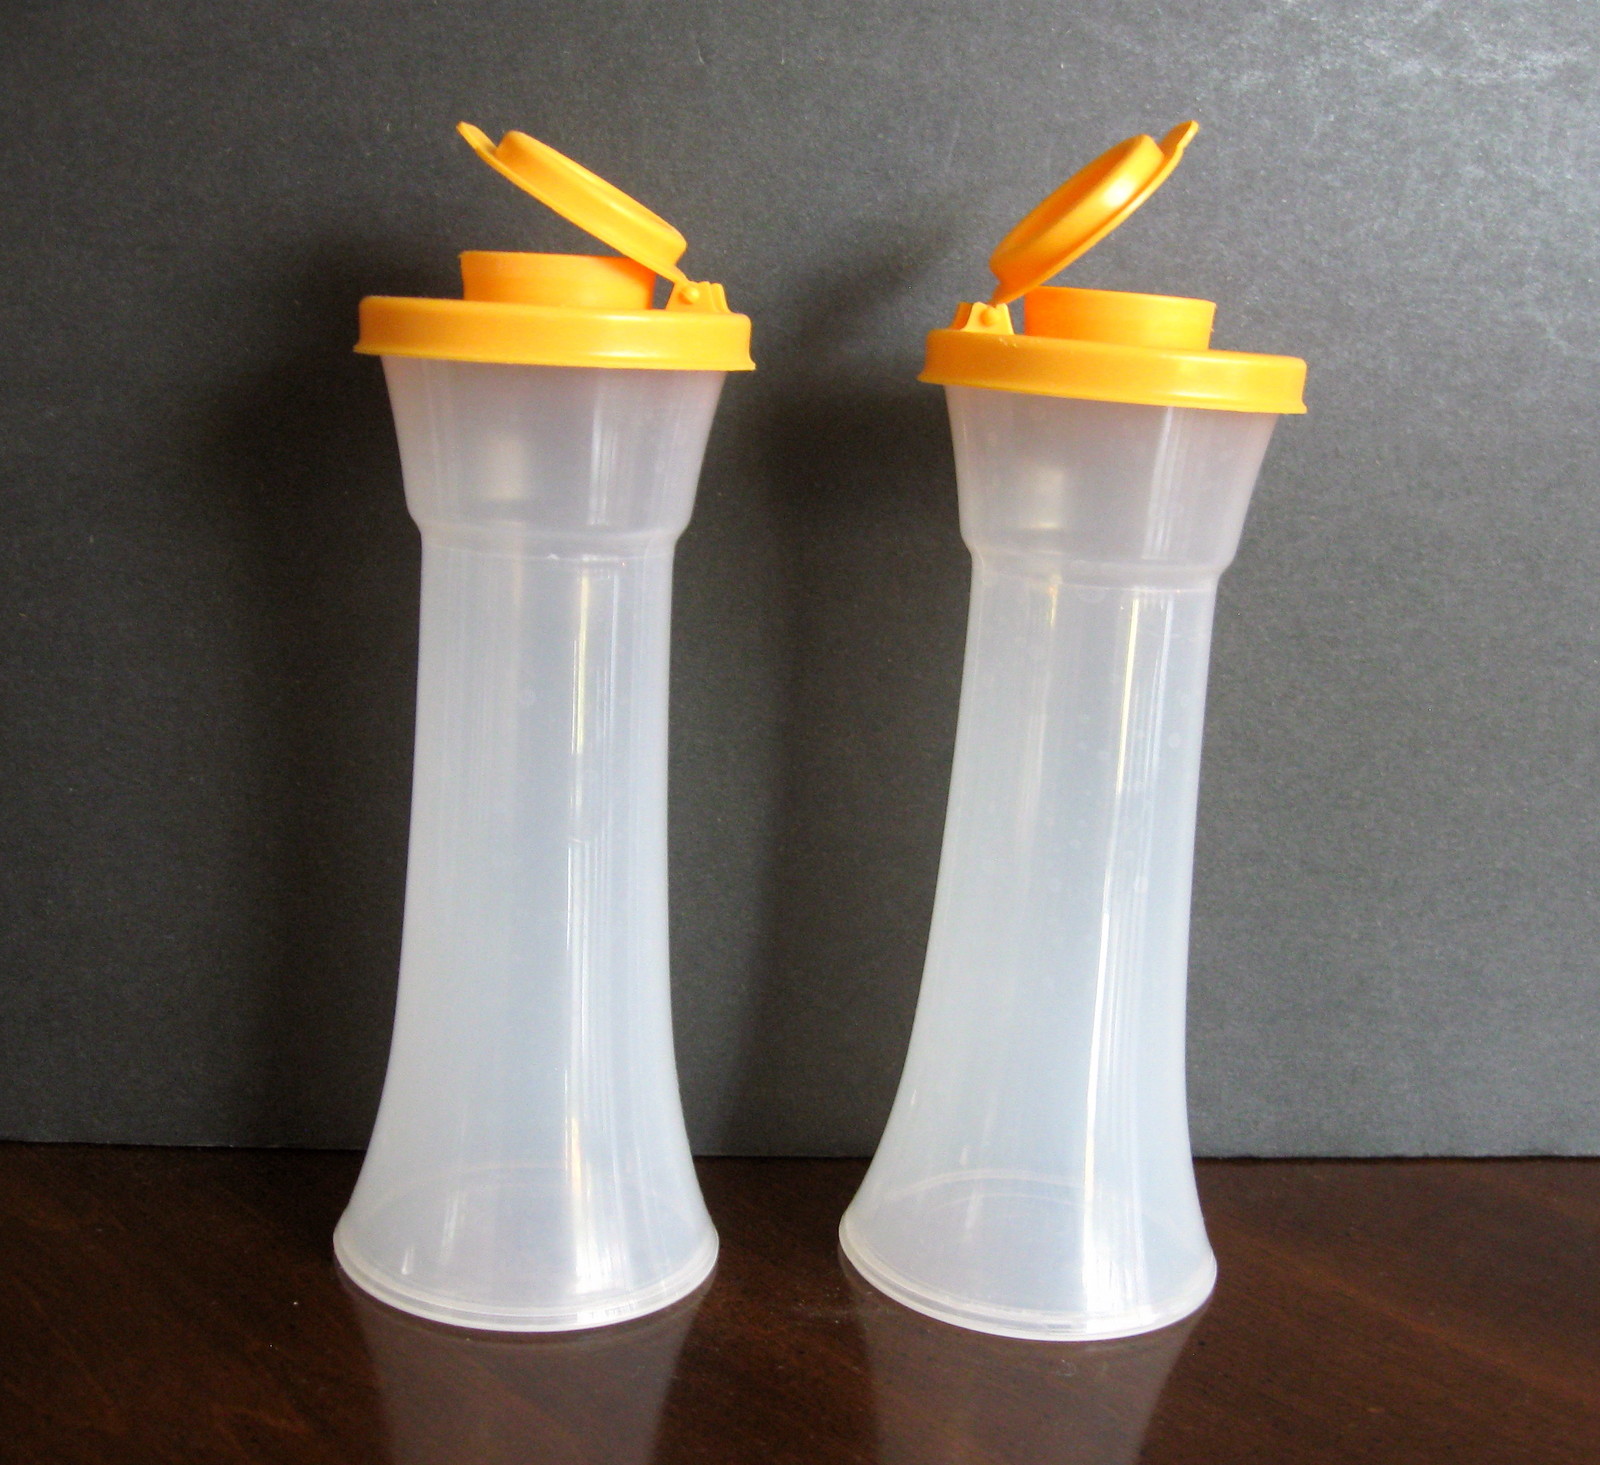  Tupperware Hourglass Salt And Pepper Shaker Lids Large Size:  Home & Kitchen